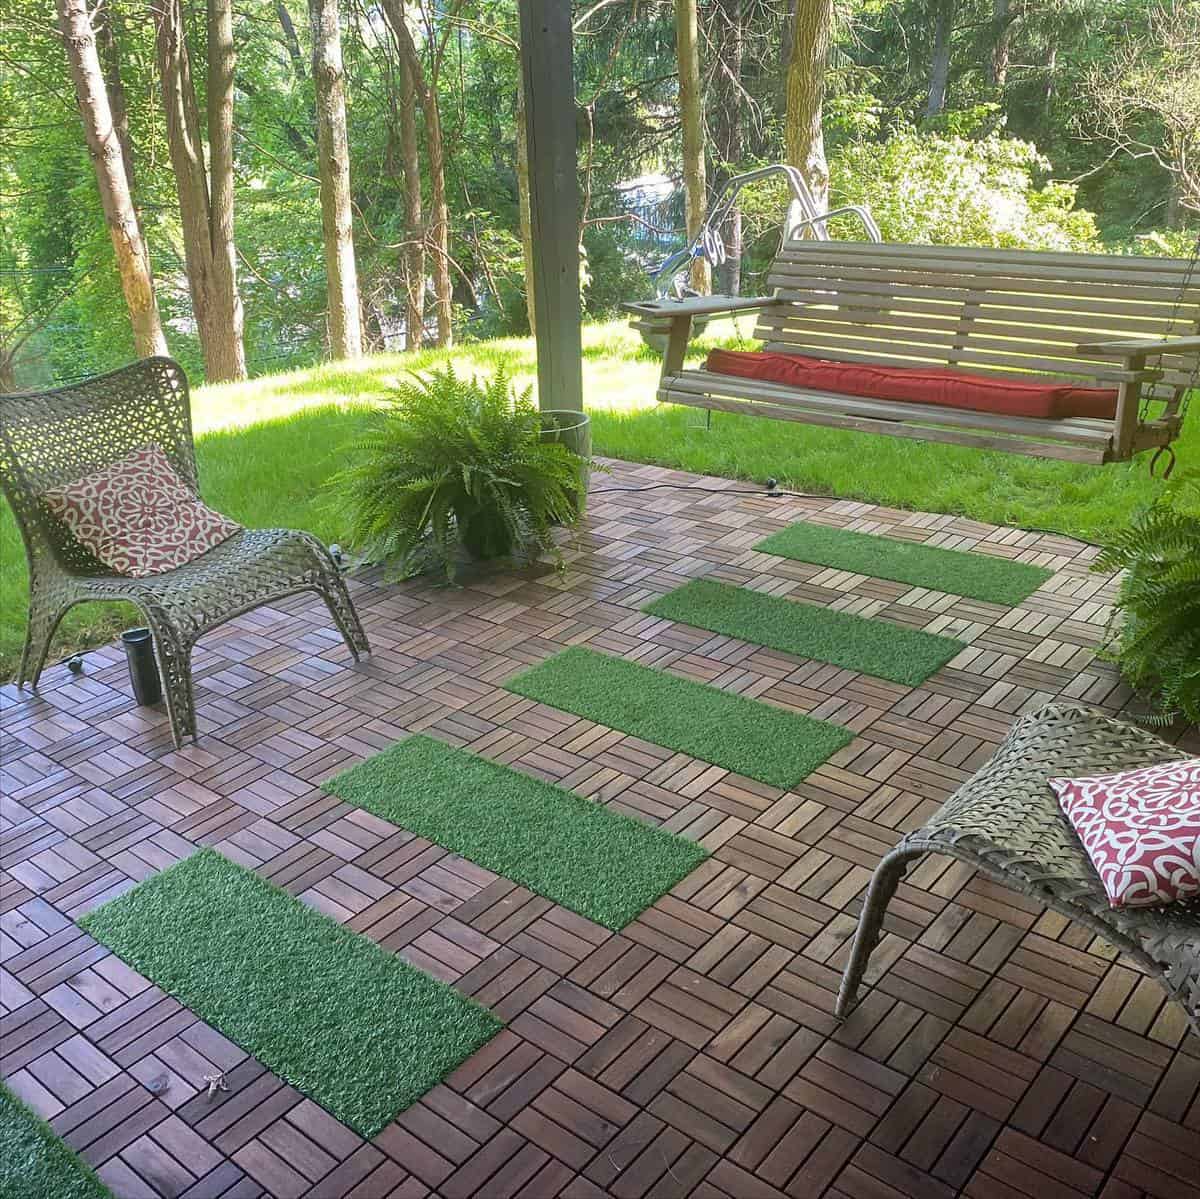 tiled terrace with hanging bench 